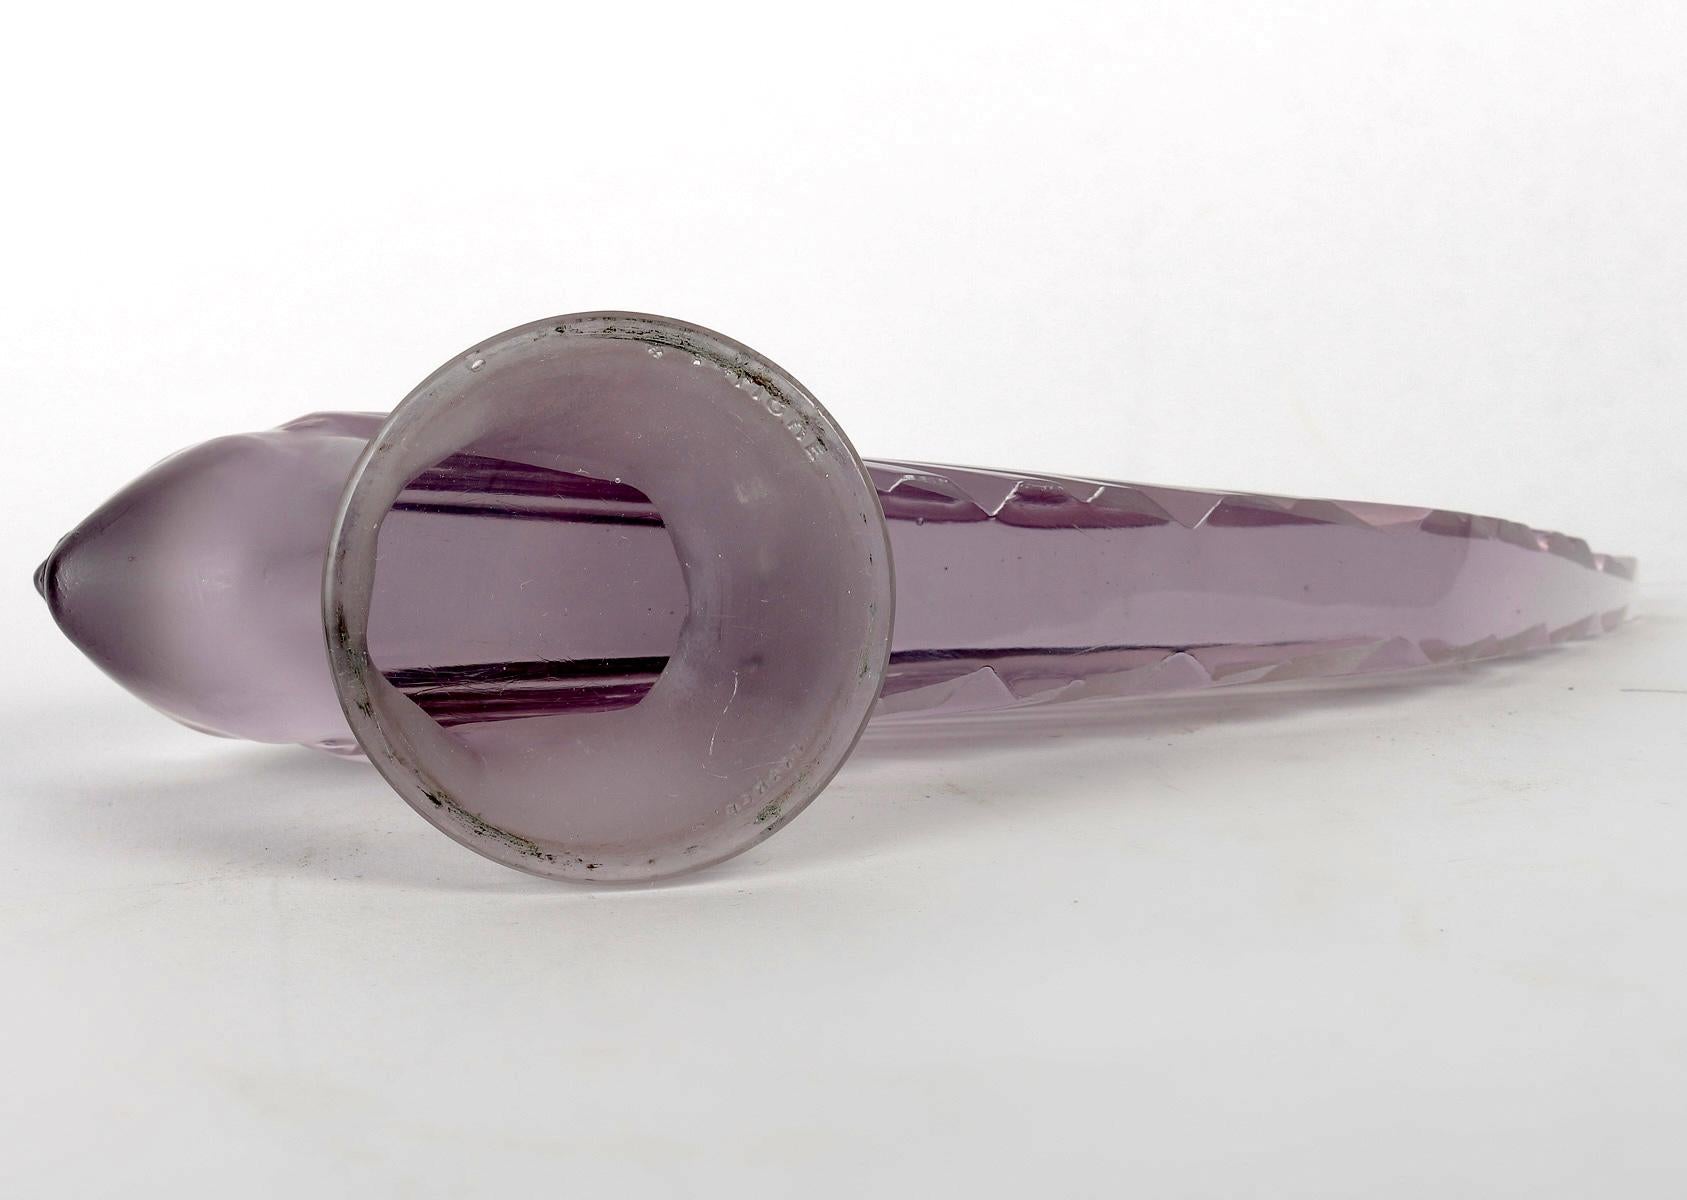 Early 20th Century 1928 René Lalique Victoire Car Mascot Hood Ornament in Amethyst Glass